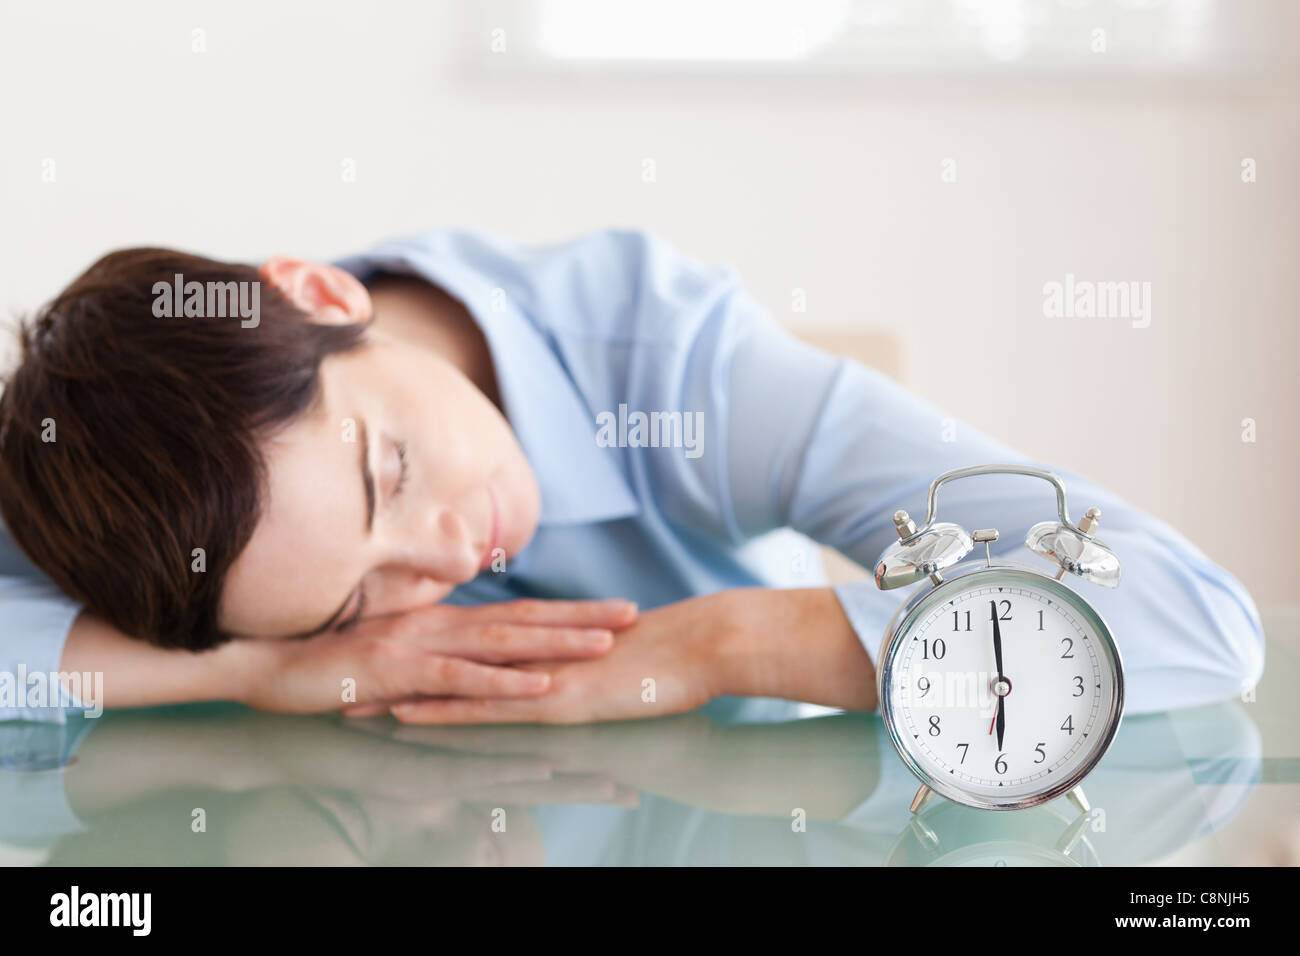 Sleeping brunette woman with her head on the desk next to an alarmclock Stock Photo